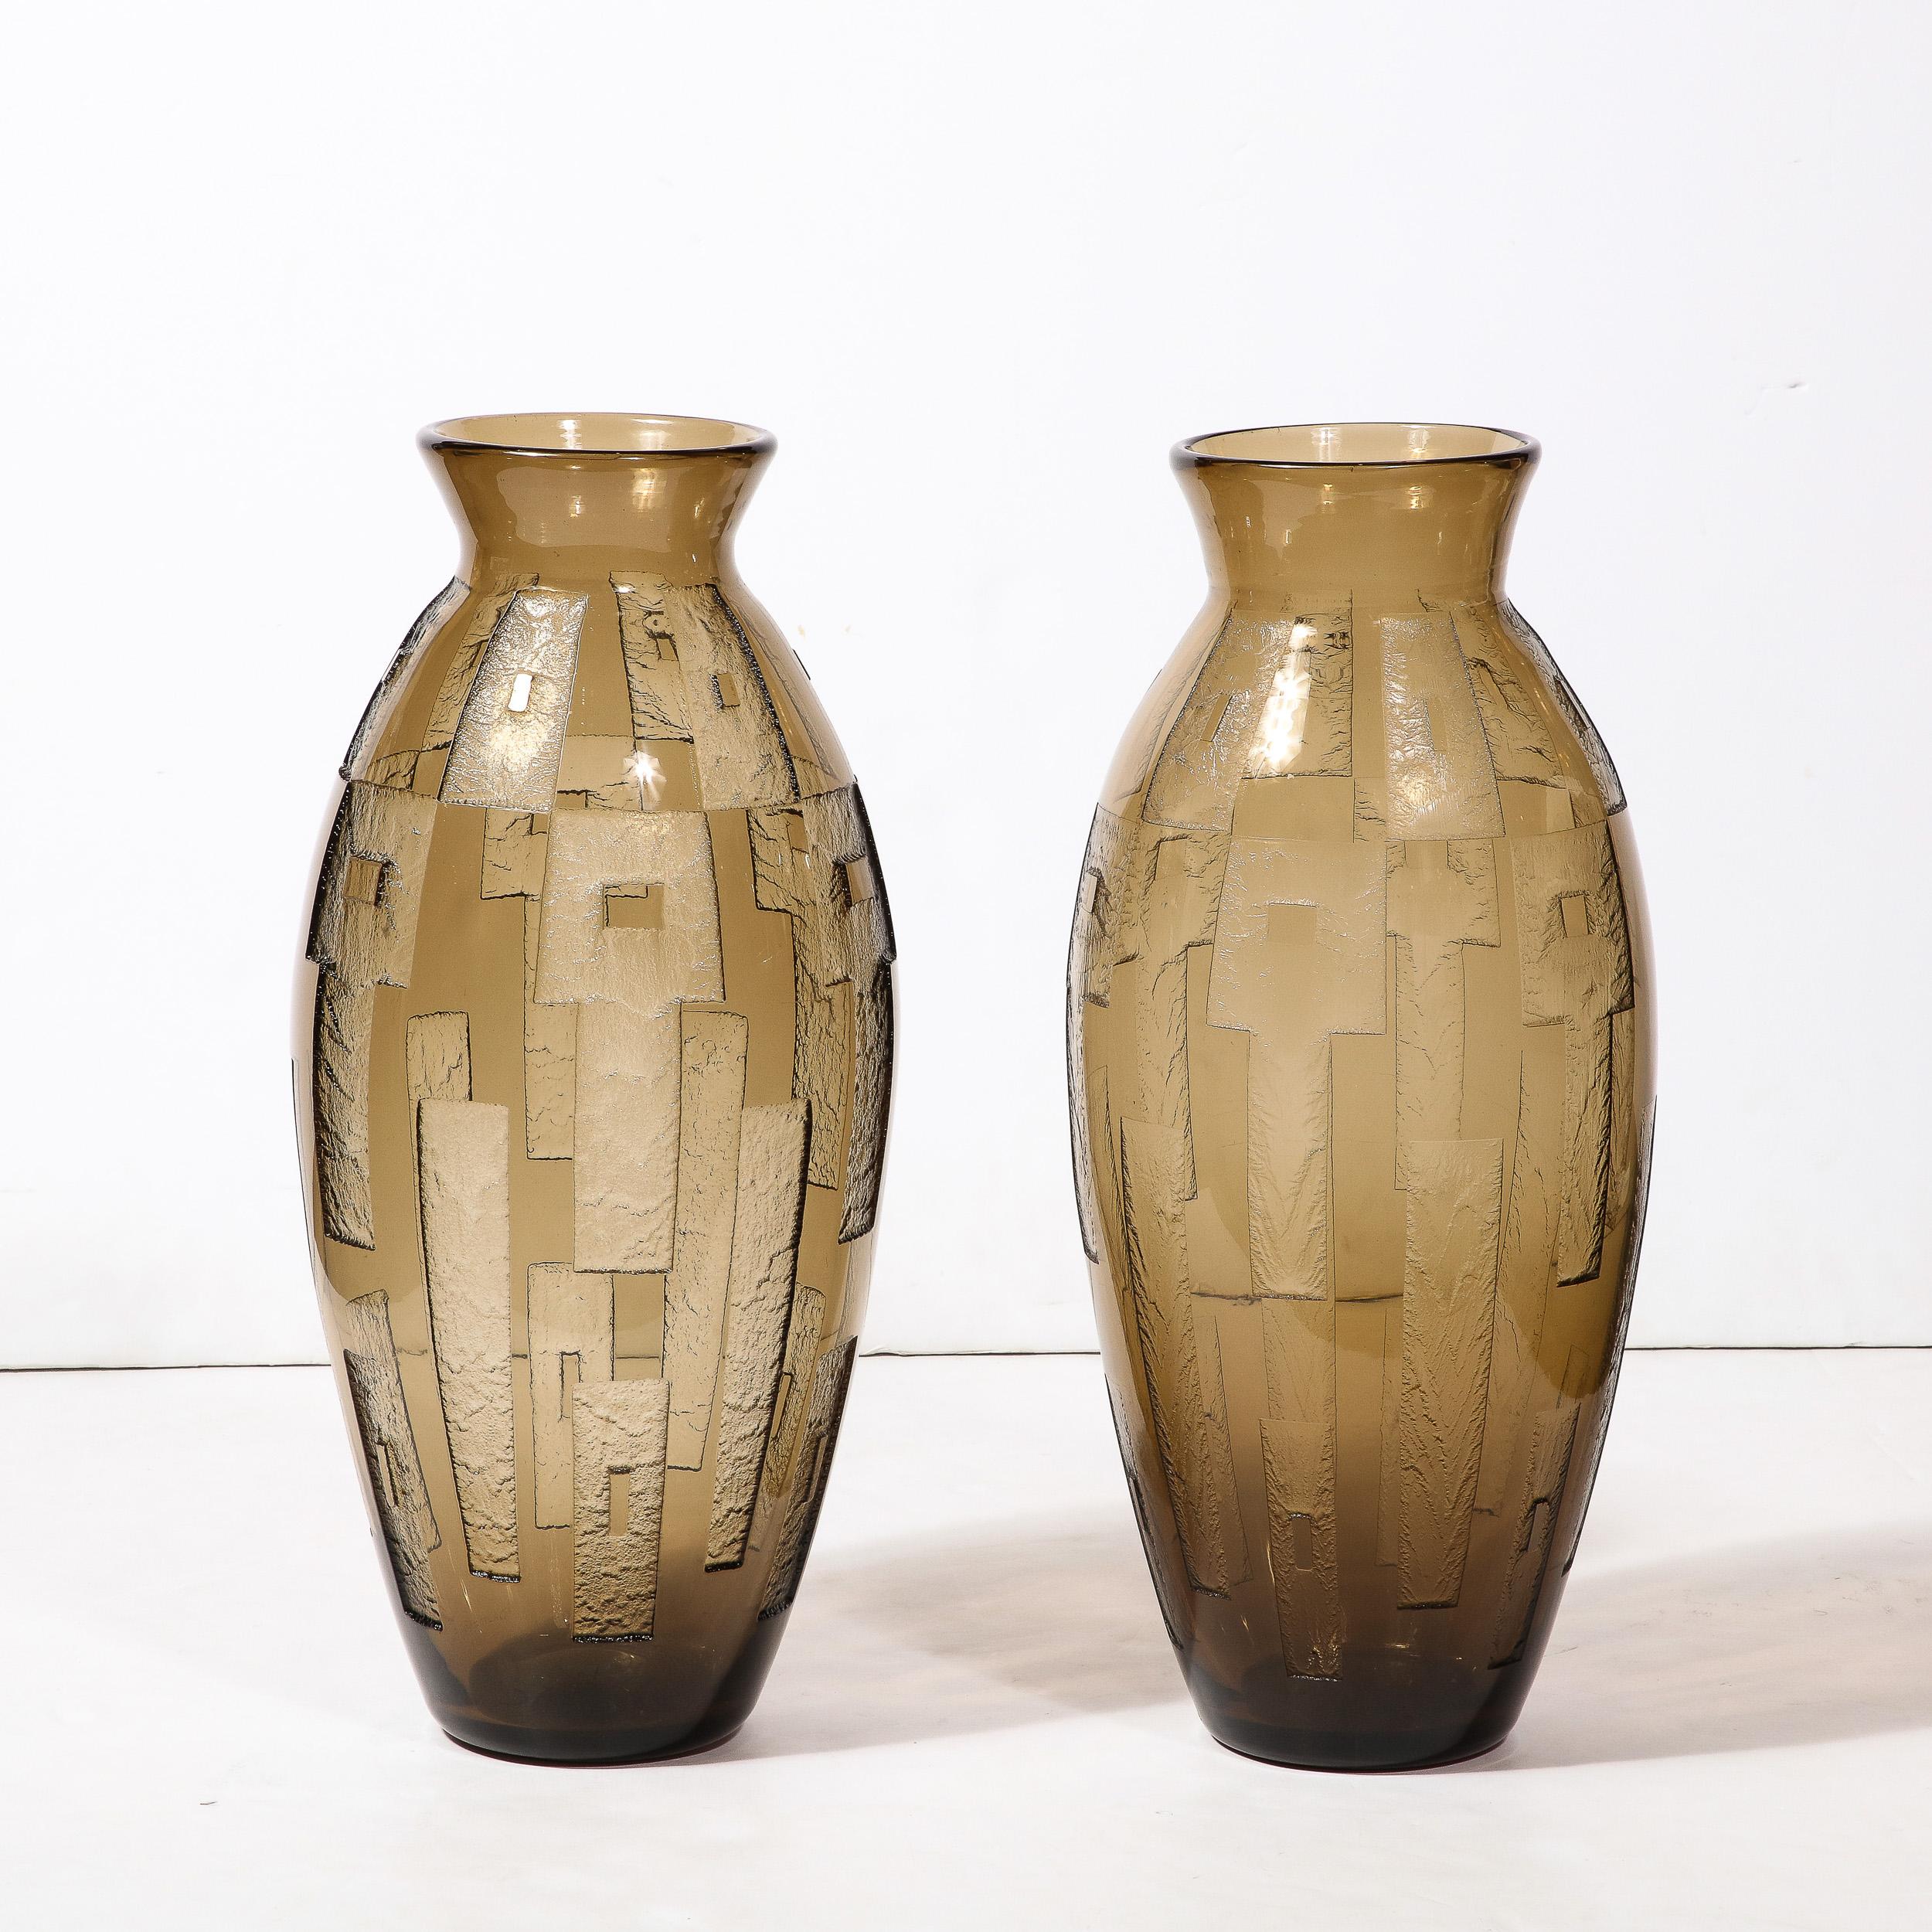 Pair of Art Deco Totem Form Vases in Acid Etched Smoked Geometric Glass by Daum For Sale 4